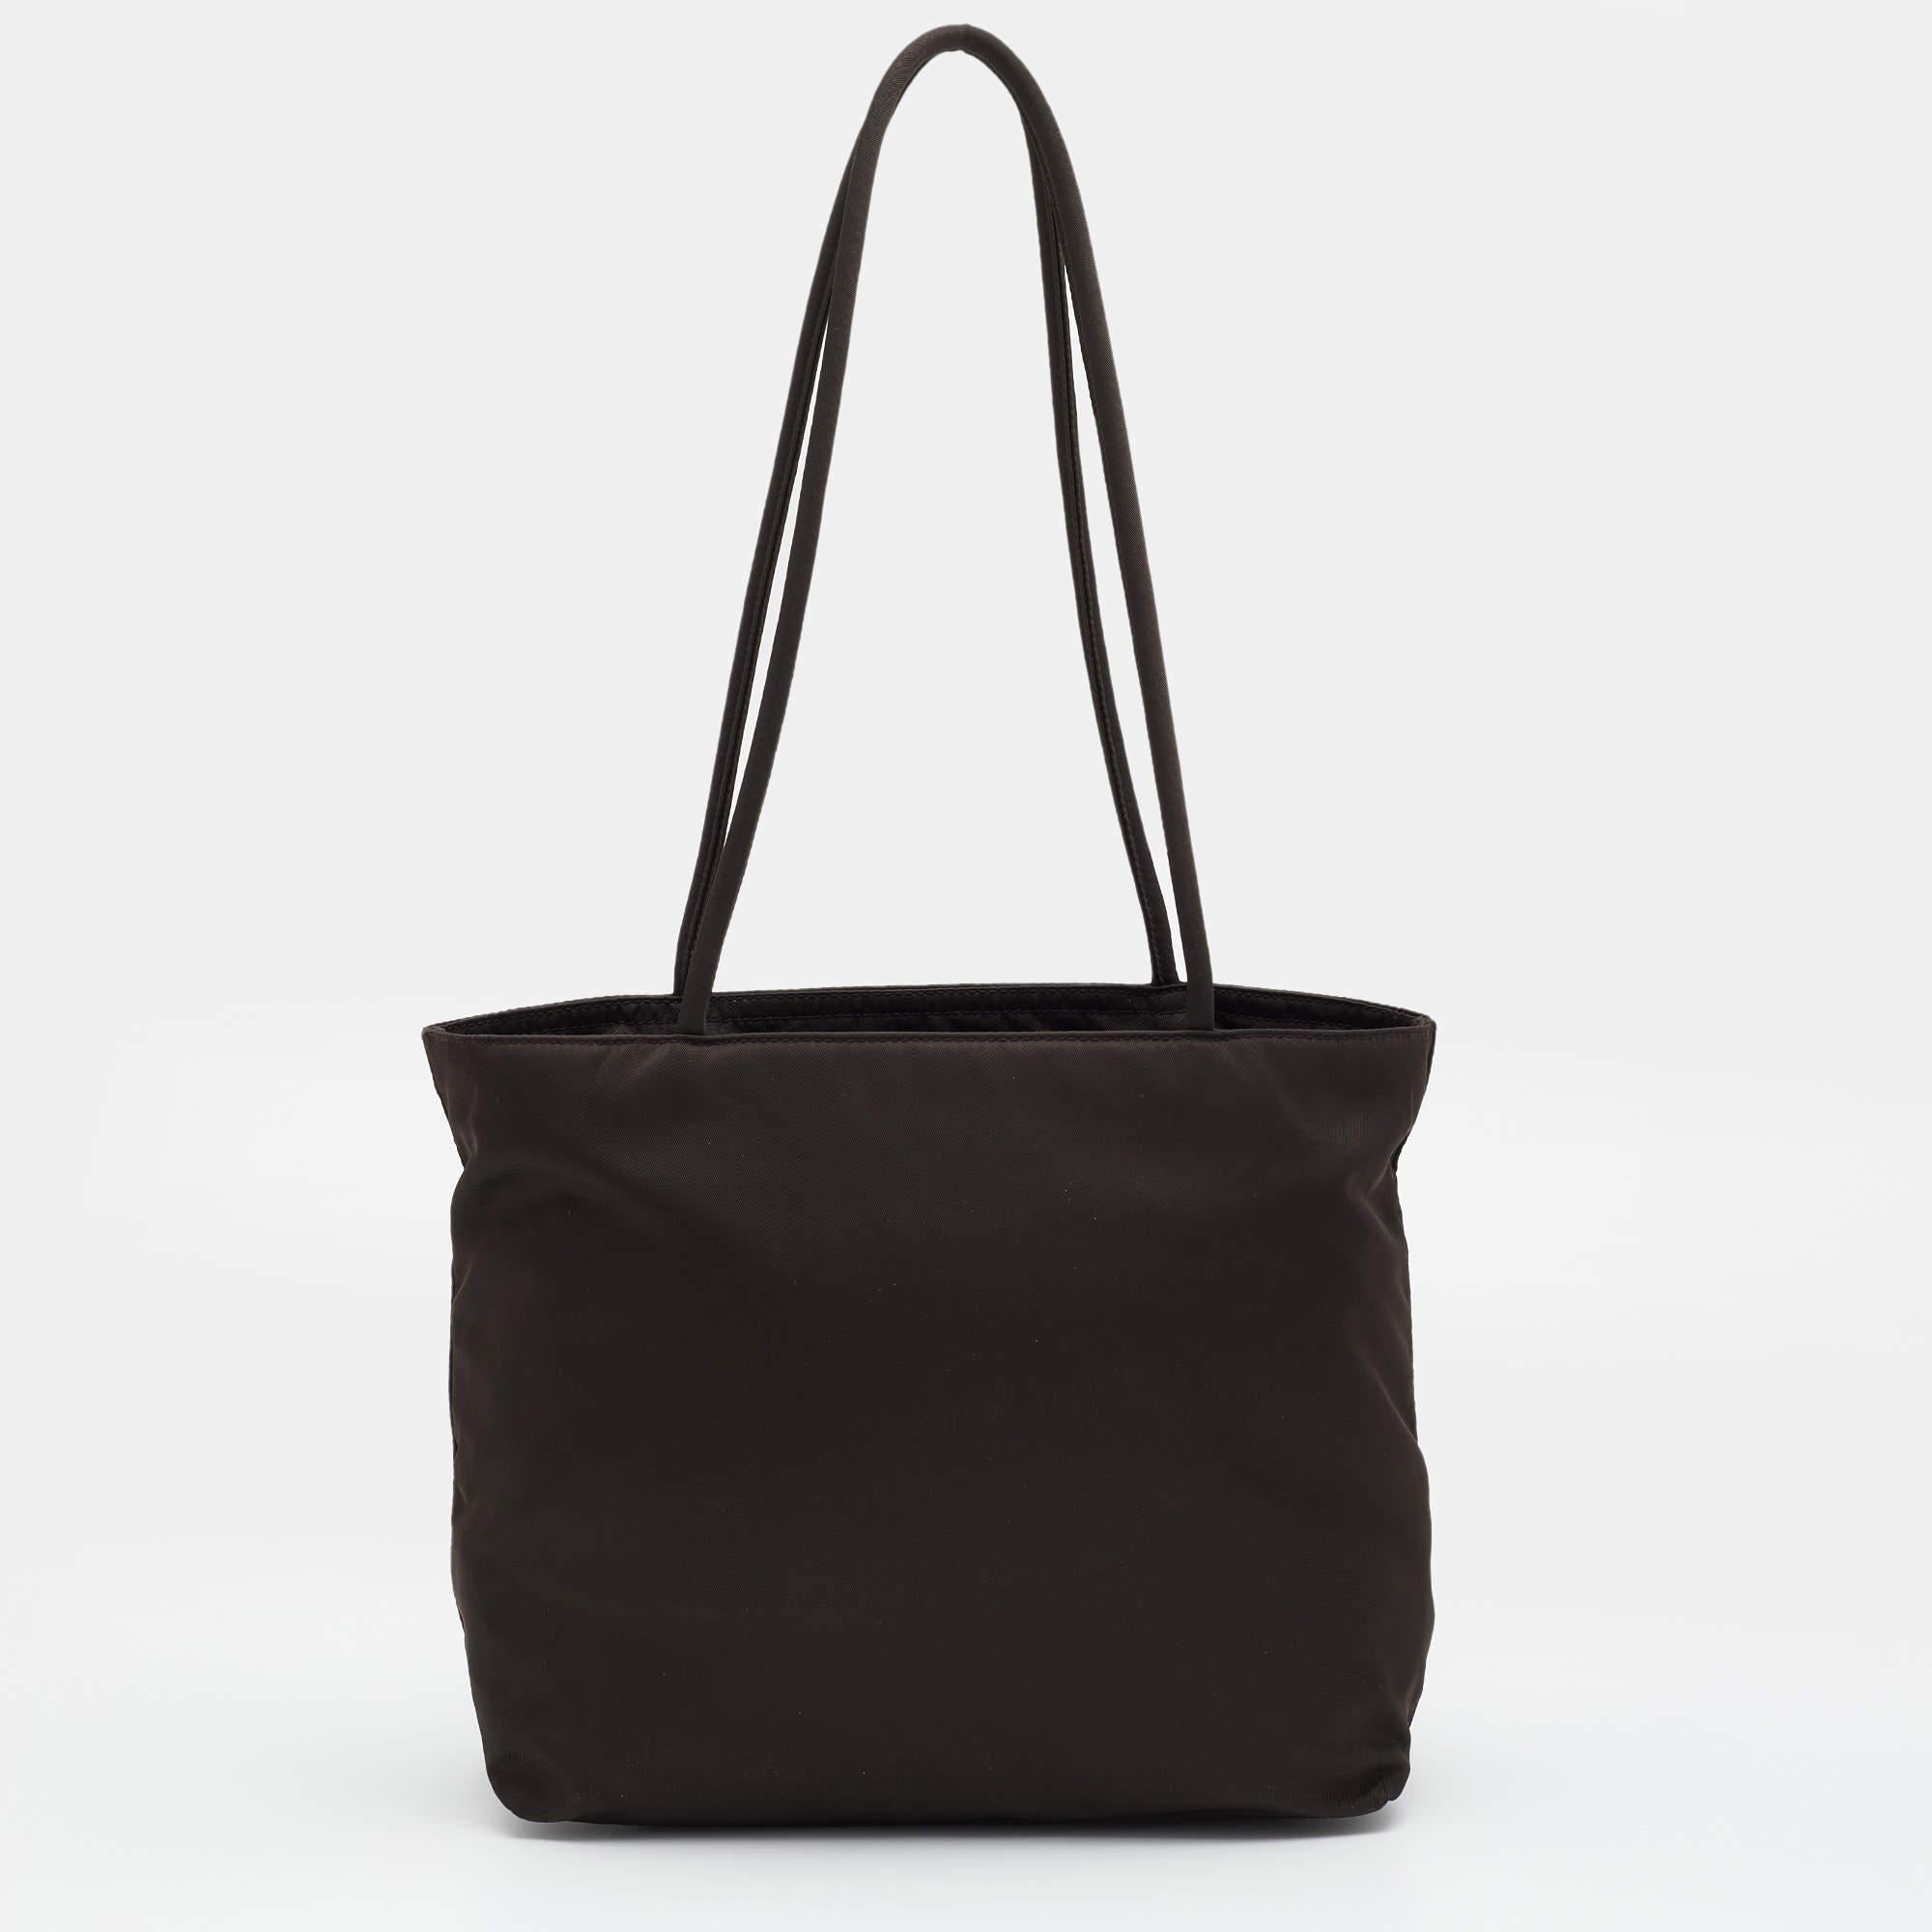 This Prada tote strikes the right balance between fashion and function. Crafted from nylon, it flaunts a brand signature on the front, dual handles at the top, and a perfectly sized interior.

